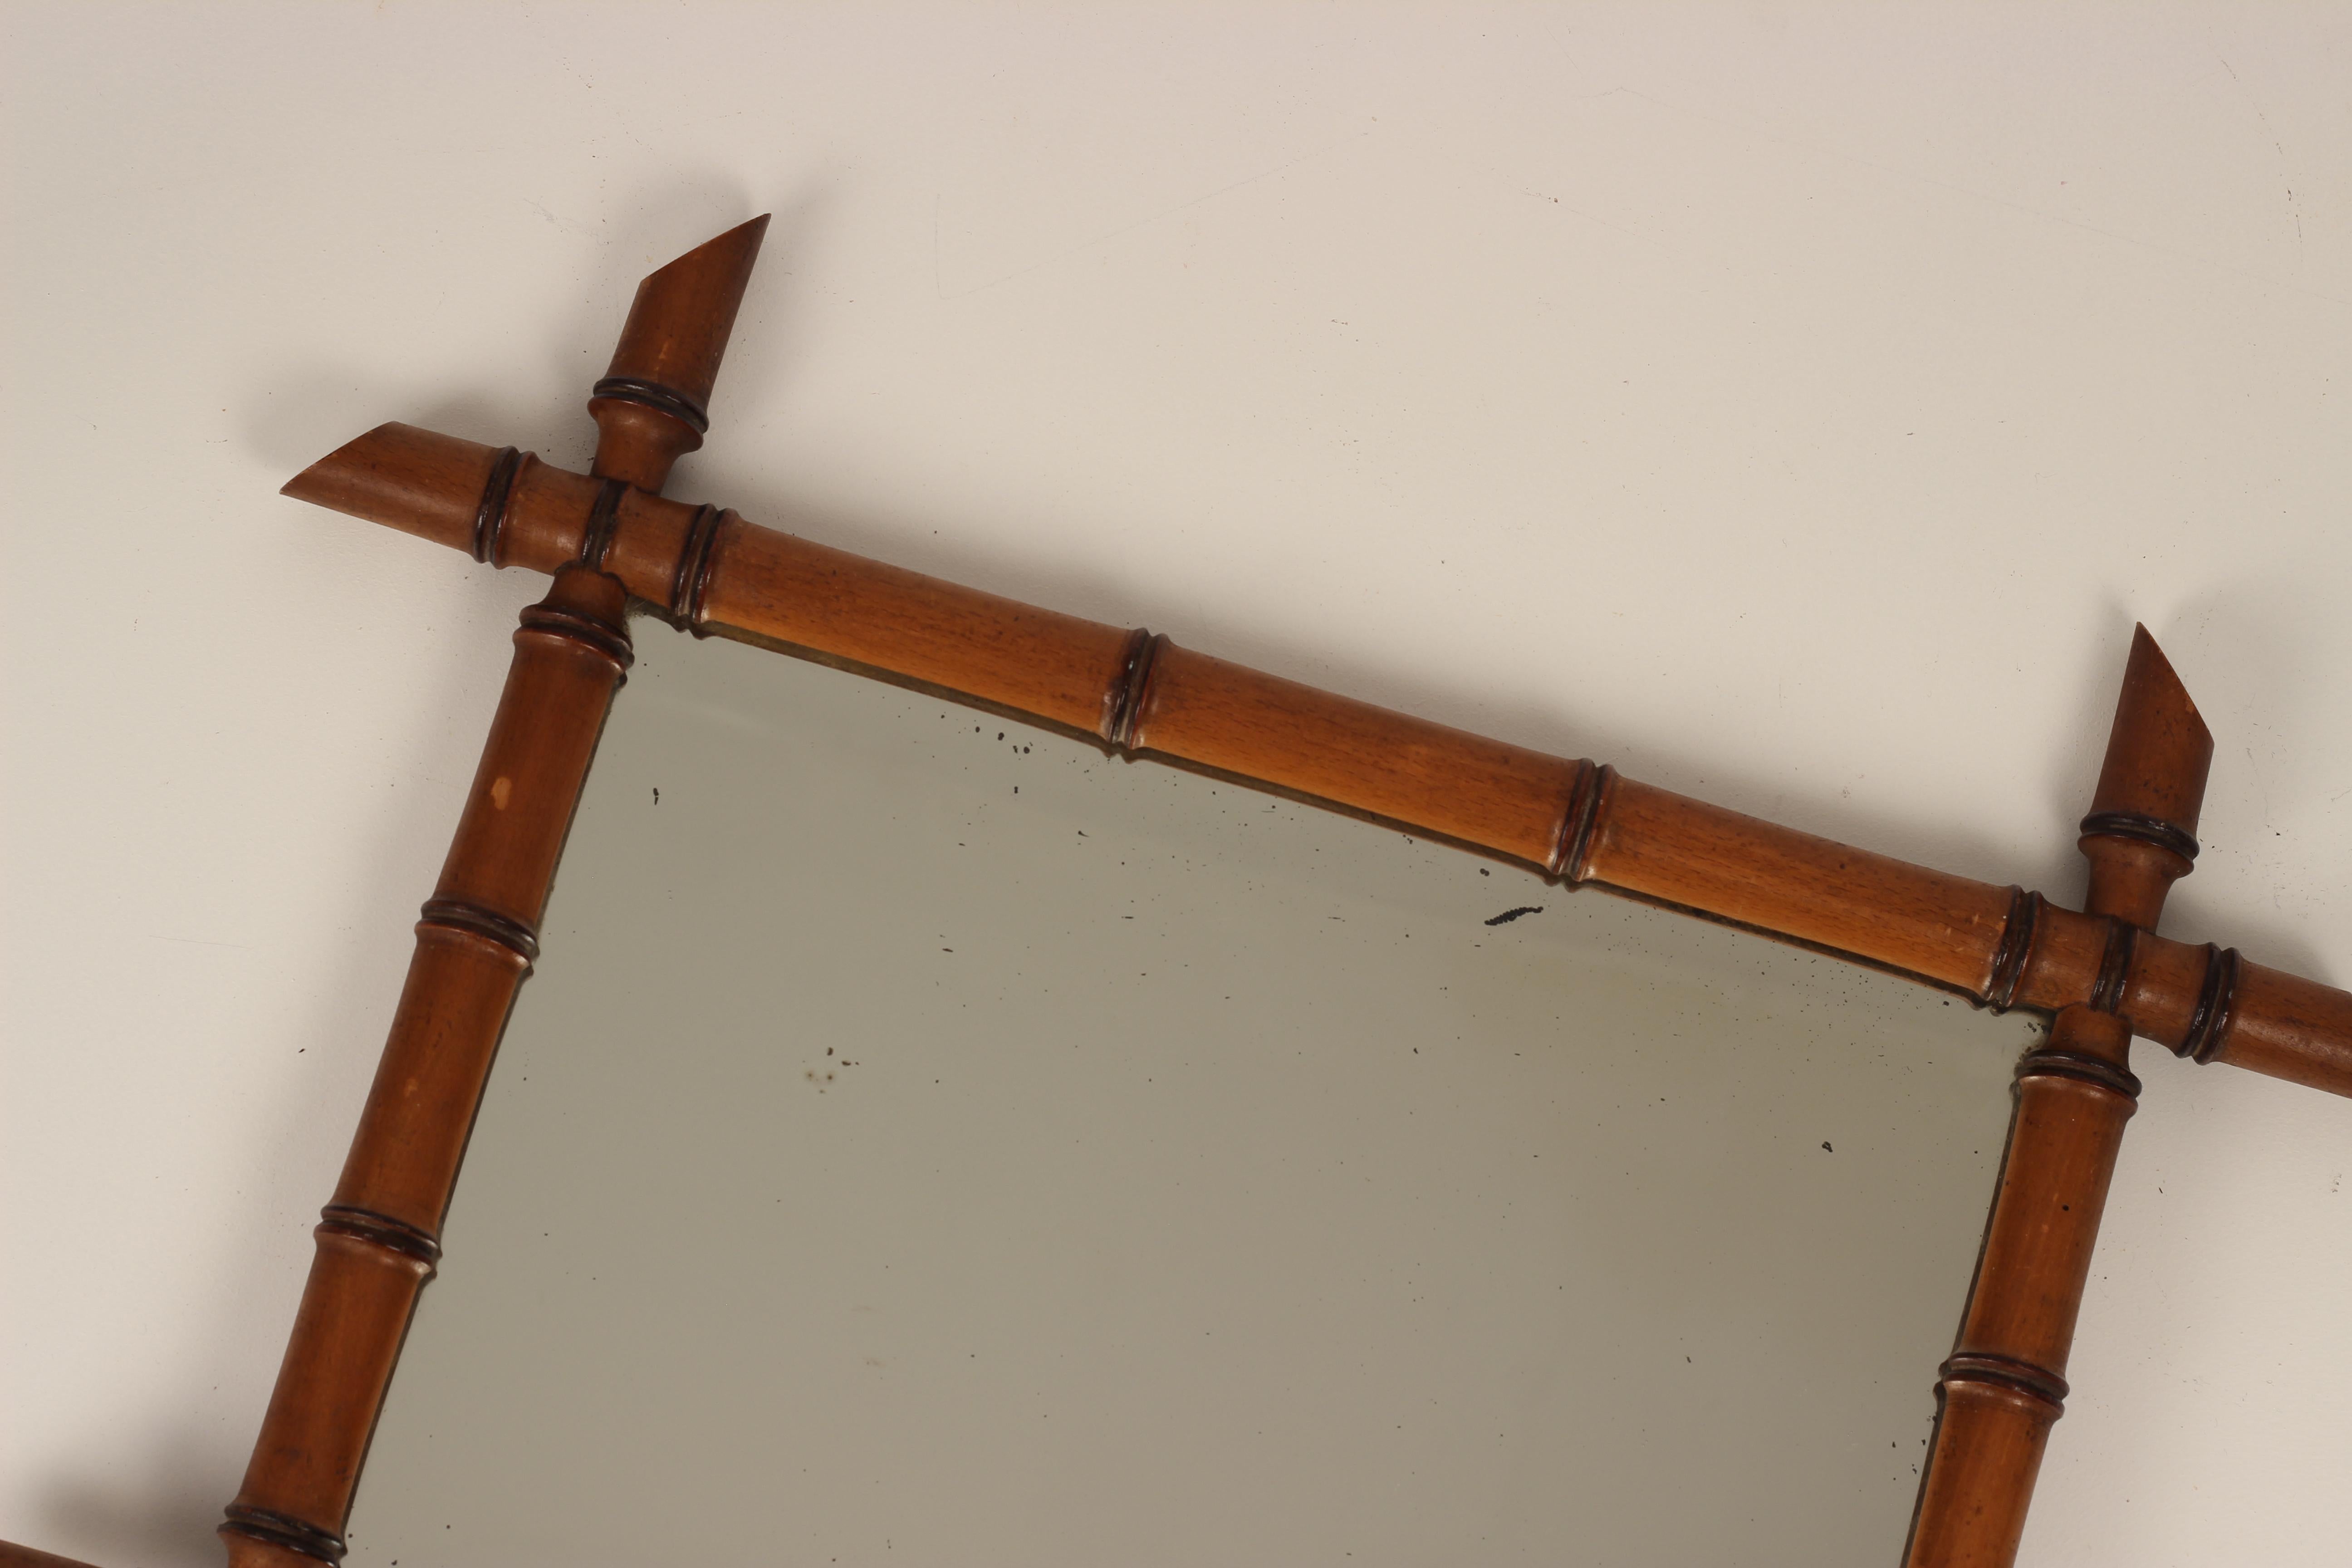 Chinoiserie Boho Chic Style Faux Bamboo Walnut Framed Mirror Made in France in mid 1800’s For Sale